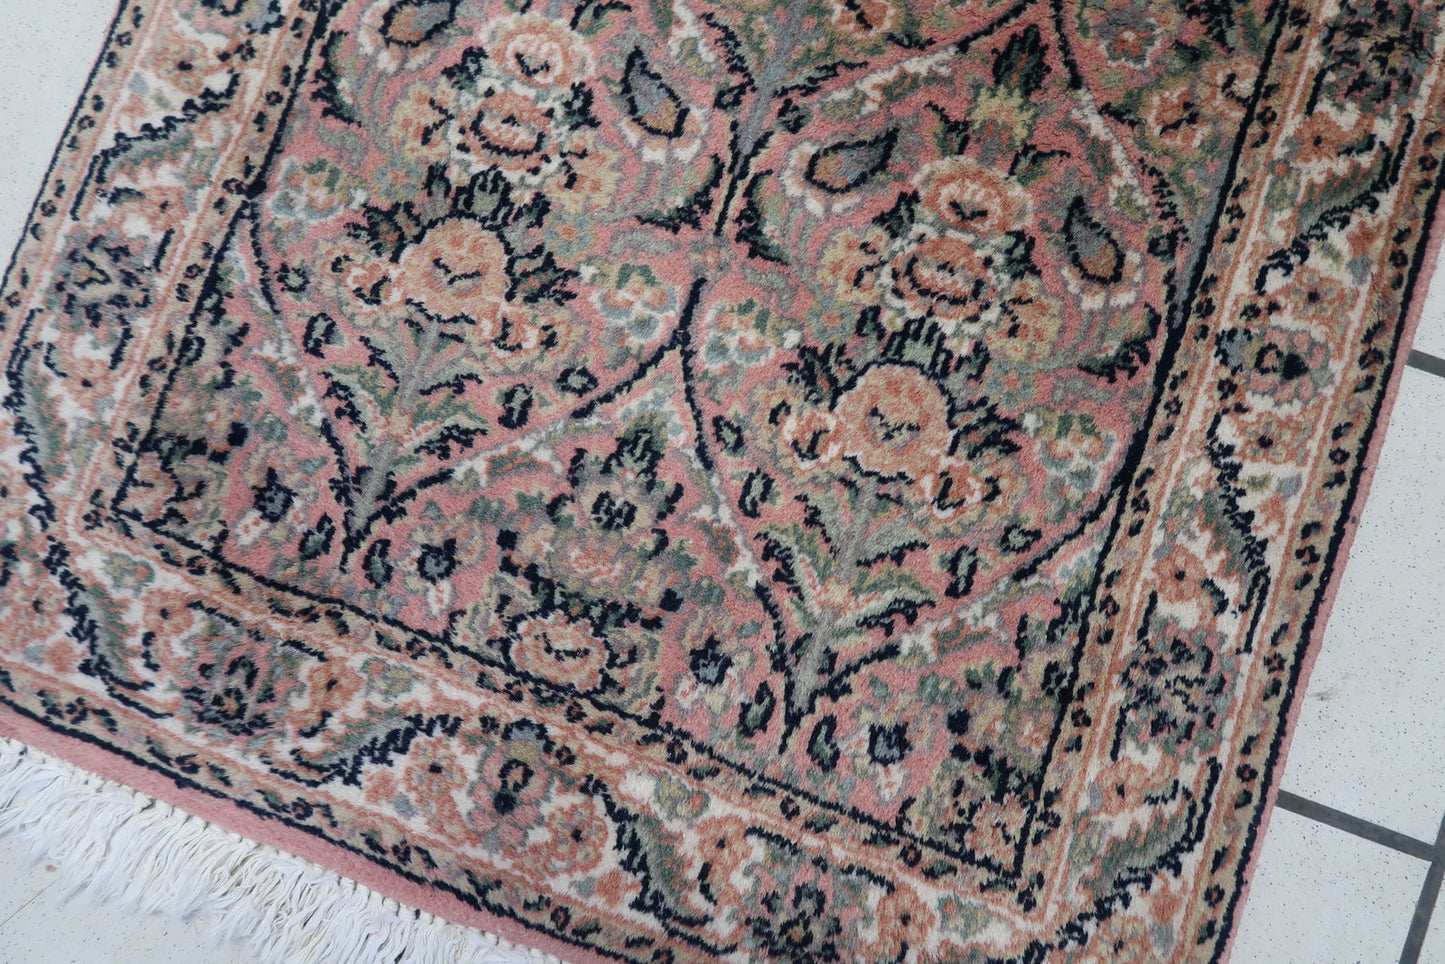 Close-up view showcasing the artistic brown designs and fine craftsmanship on the rug.